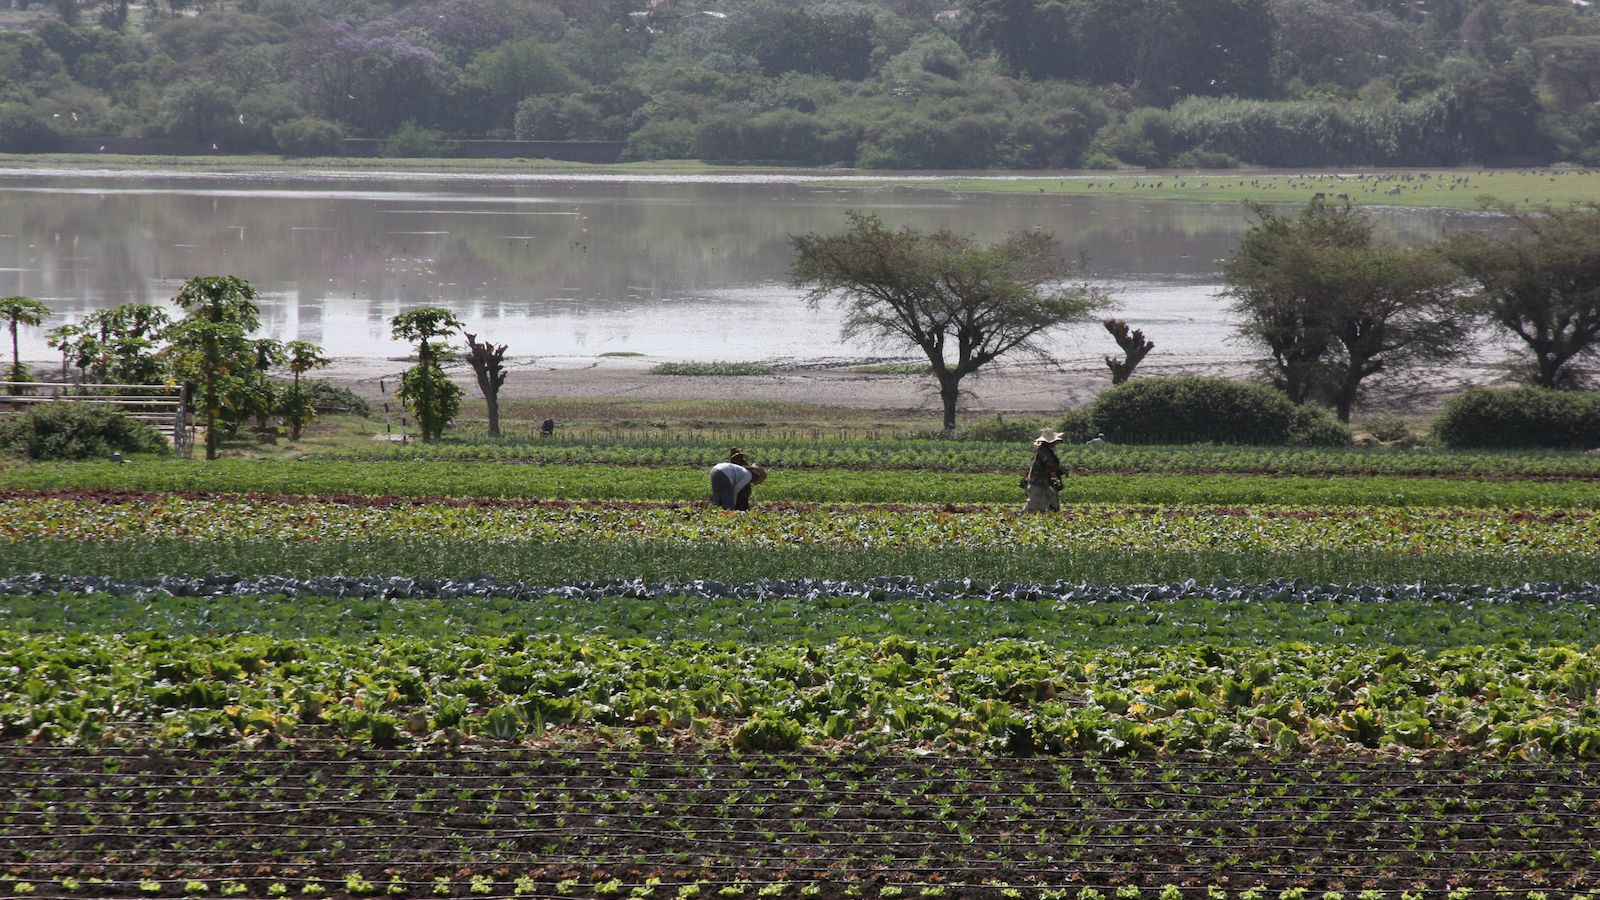 Fields and water in Ethiopia. Nena Terrell/USAID.